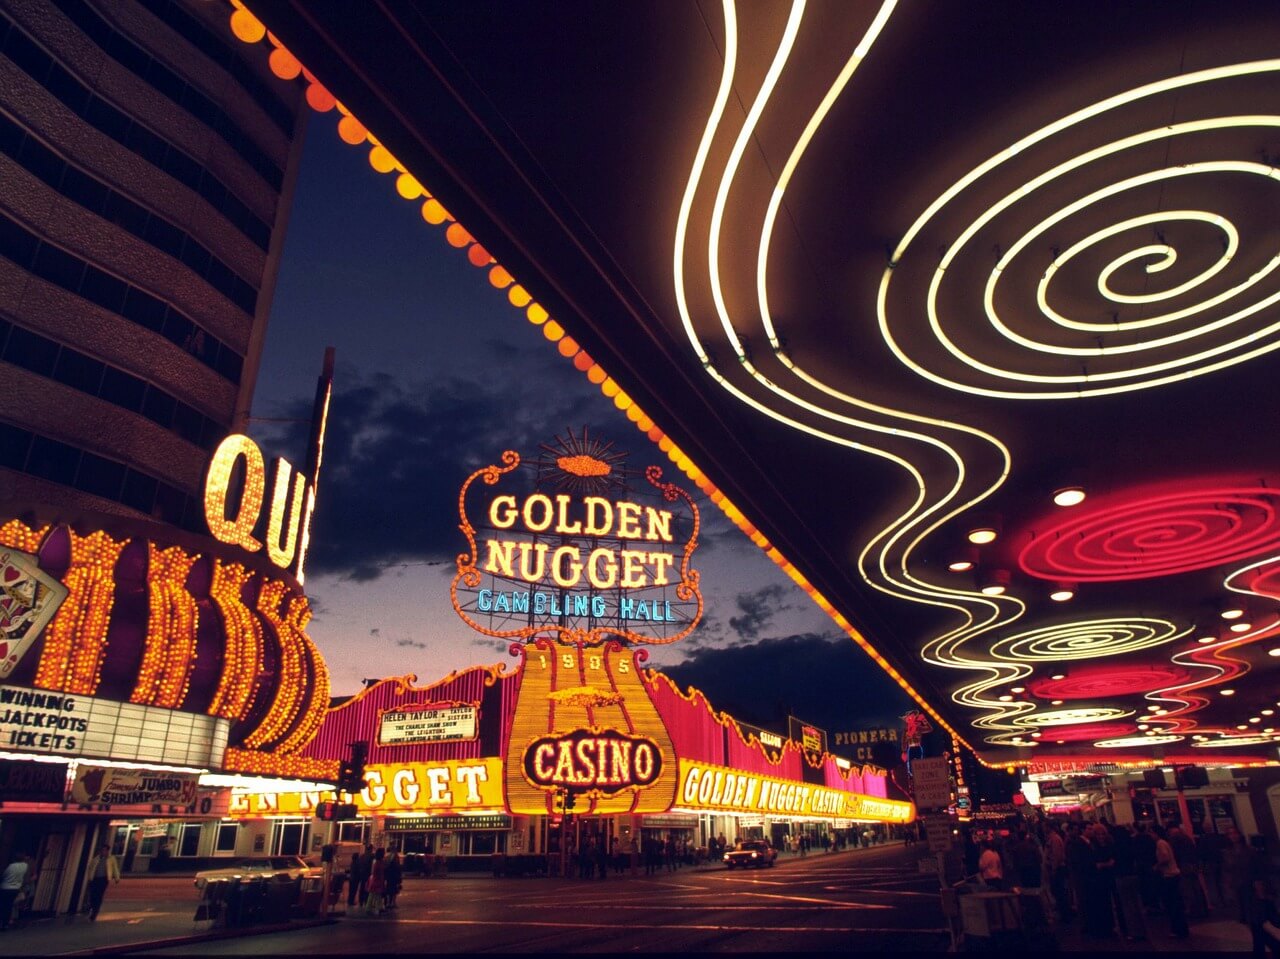 The exterior of the Golden Nugget casino